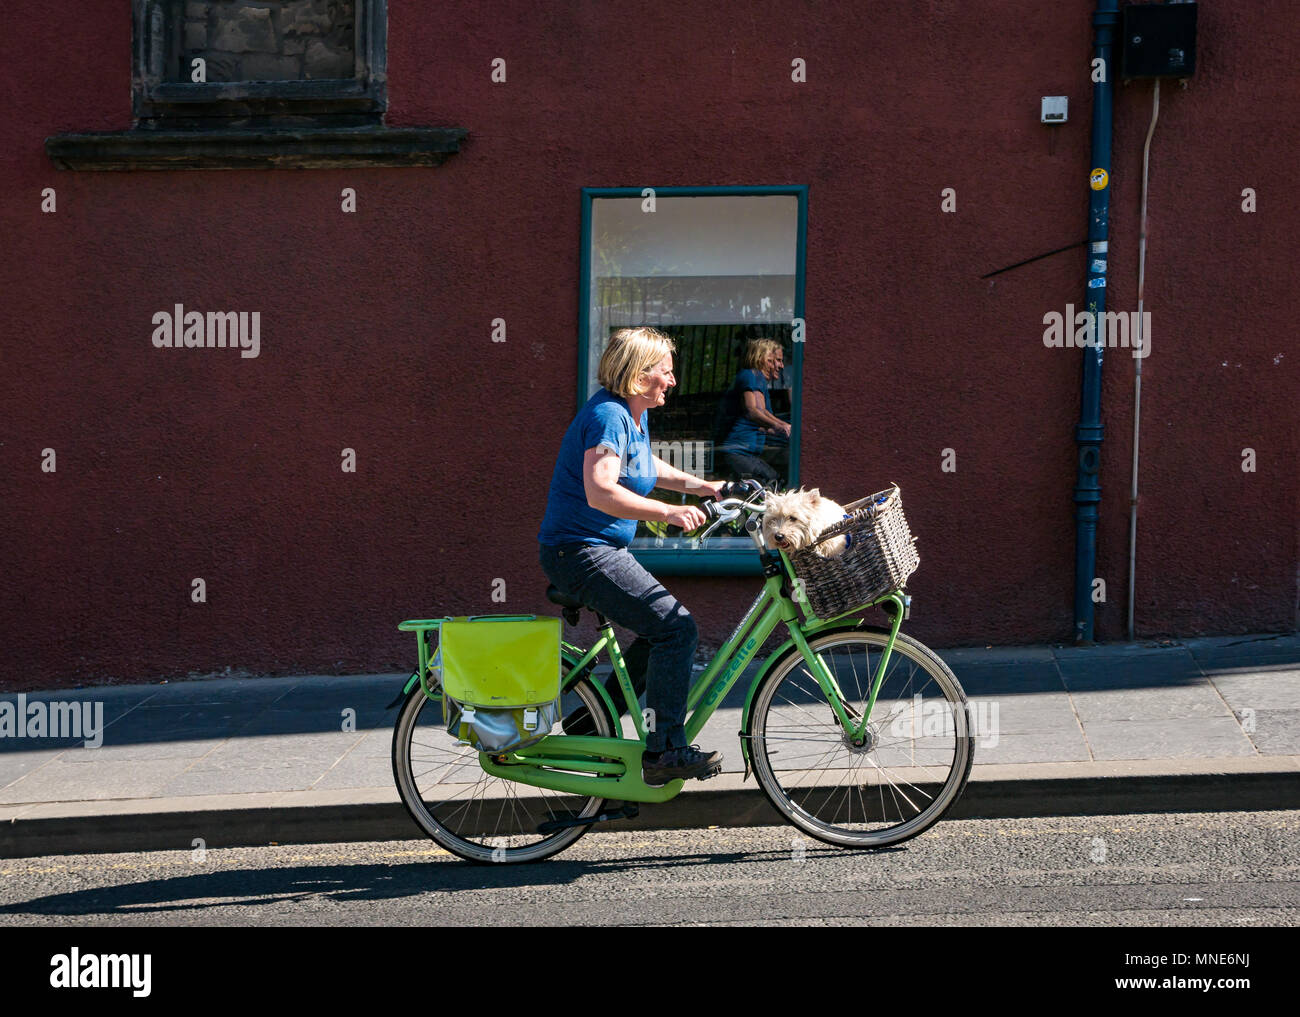 Royal Mile, Edinburgh, 16th May 2018. An older woman cycles along the Royal Mile on an old fashioned bicycle with a terrier dog in the basket, with her reflection in a window as she cycles past Stock Photo